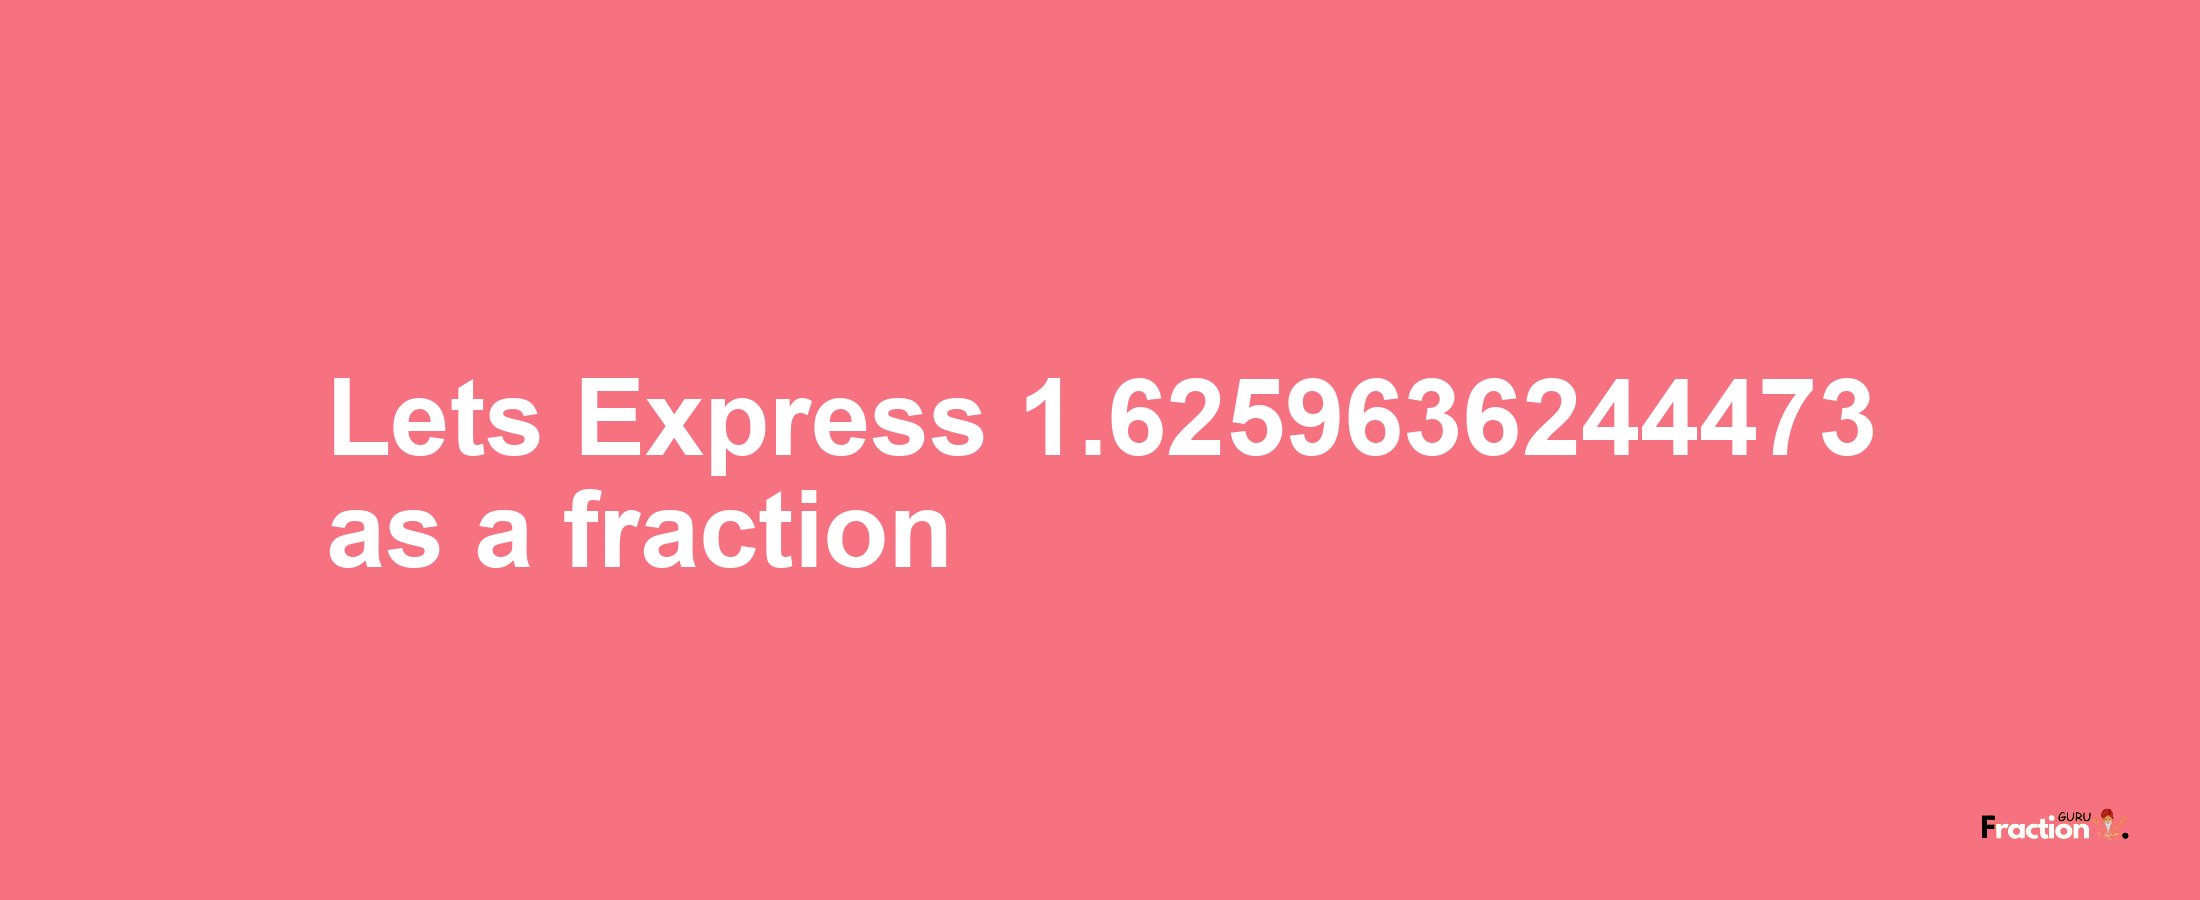 Lets Express 1.6259636244473 as afraction